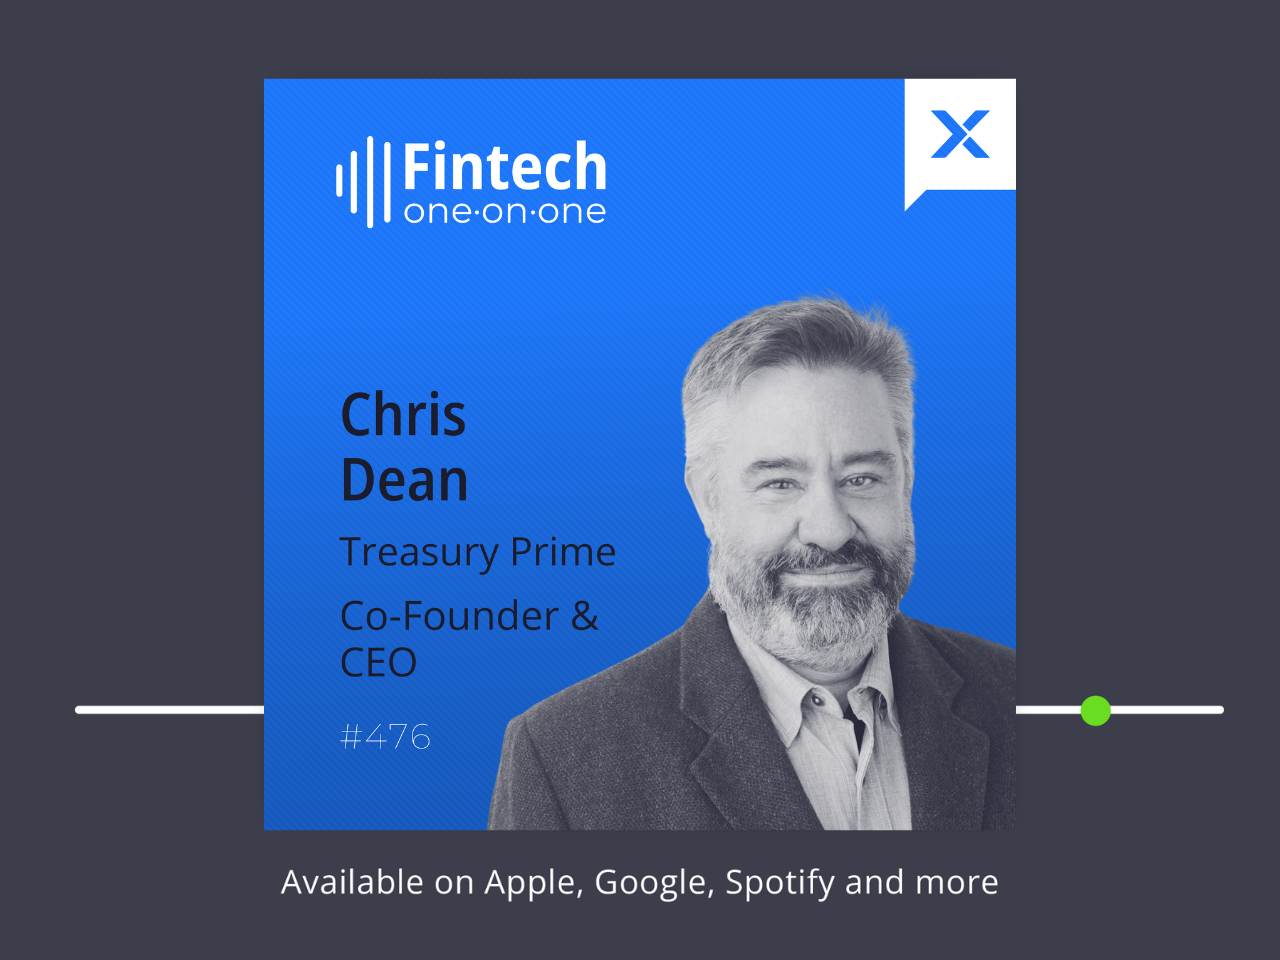 Chris Dean, Co-Founder & CEO of Treasury Prime on the banking-as-a-service panorama